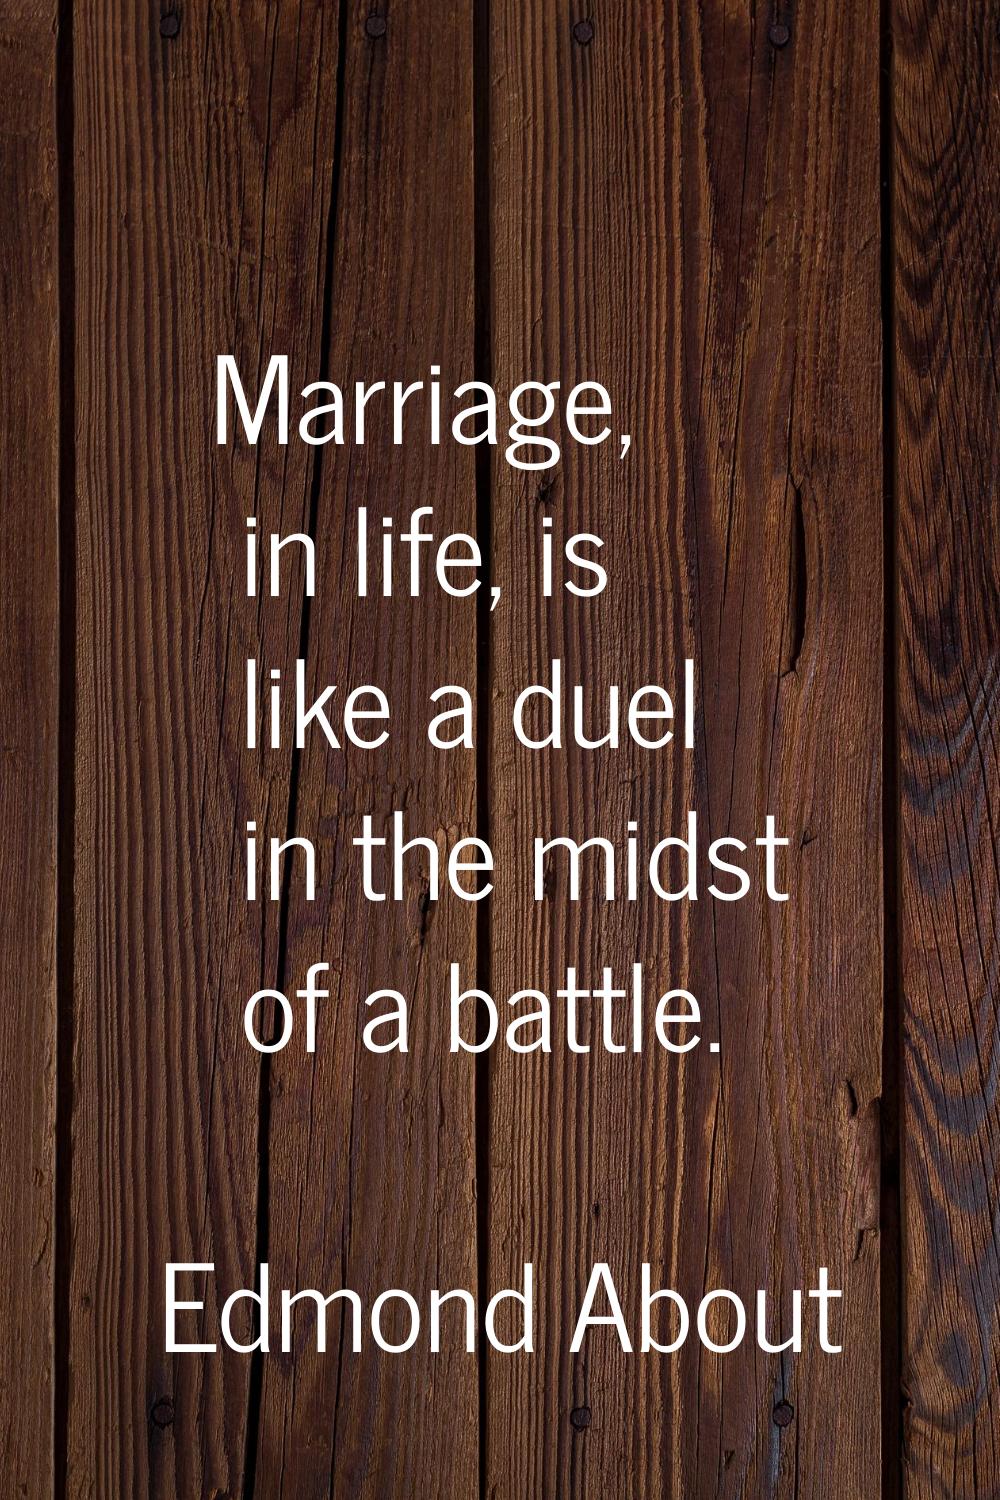 Marriage, in life, is like a duel in the midst of a battle.